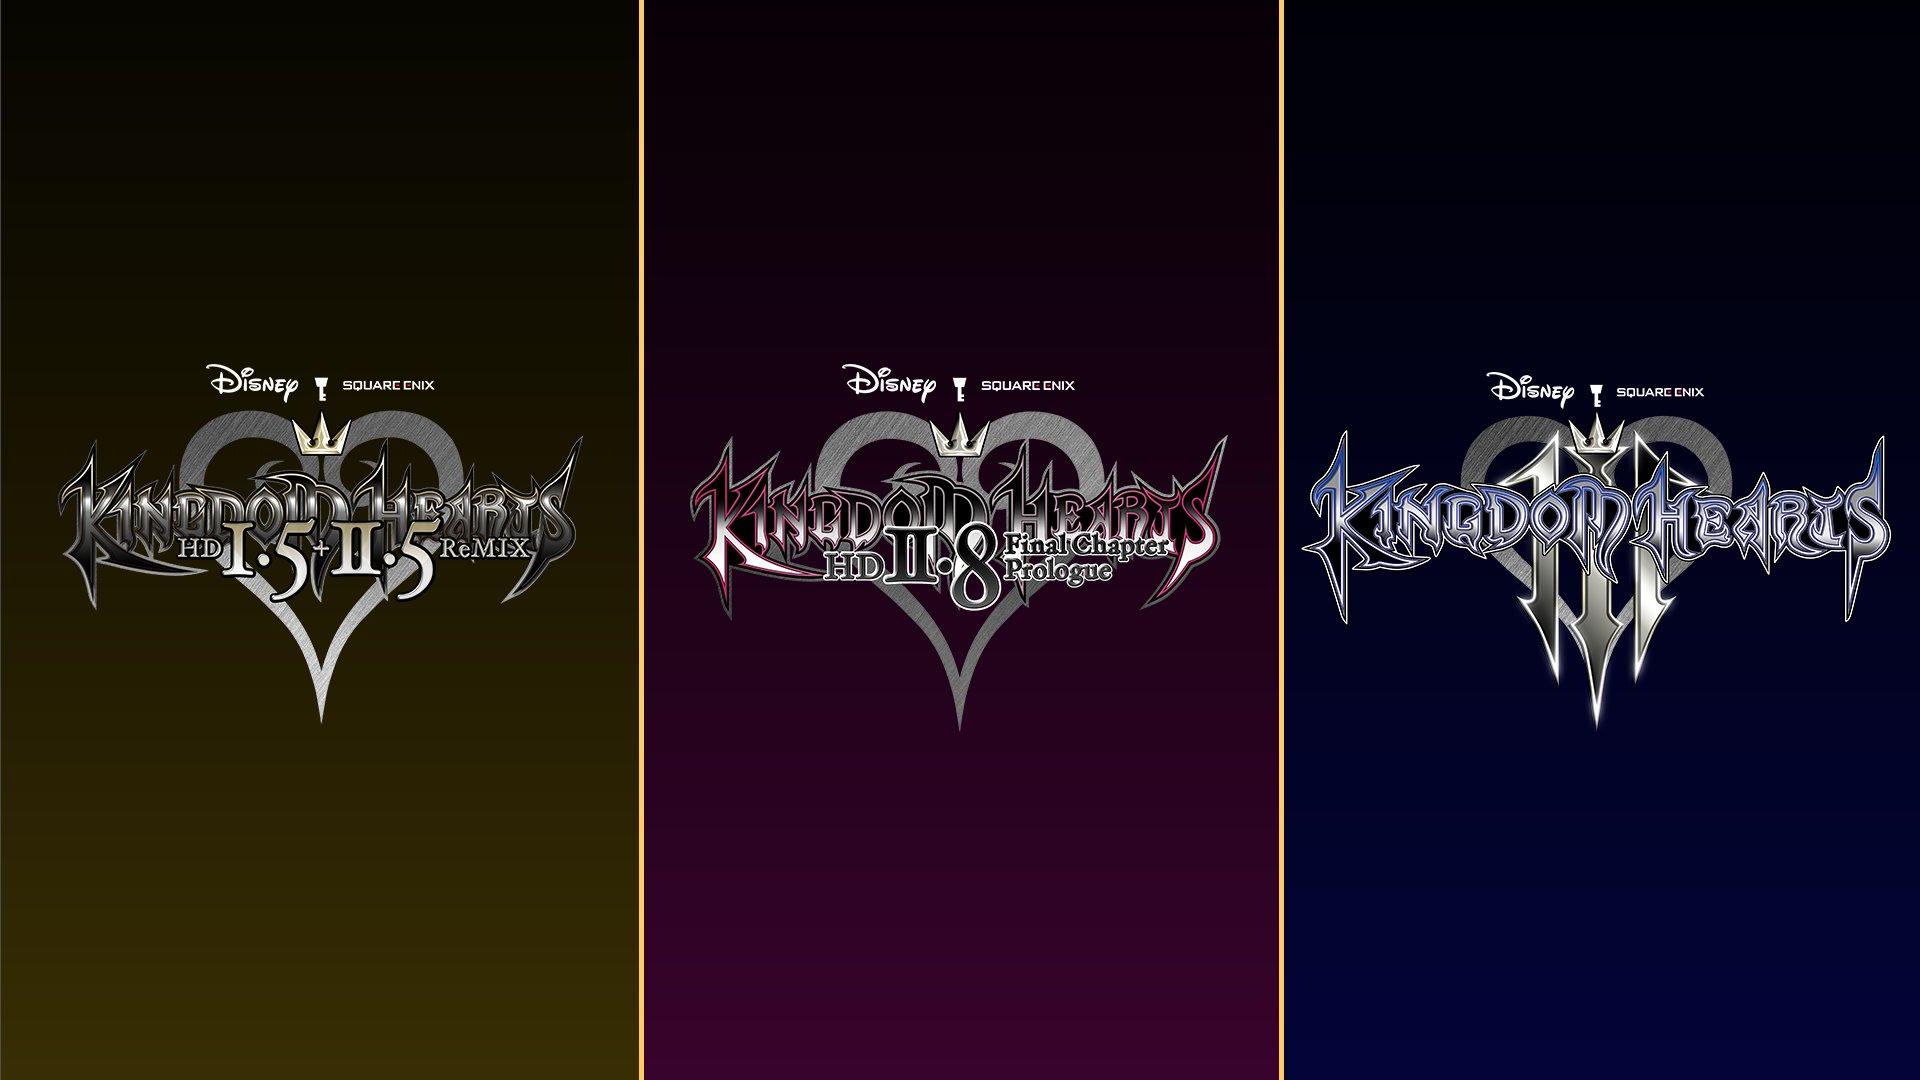 tro tromme masse How to Play the 'Kingdom Hearts' Games in Chronological Order